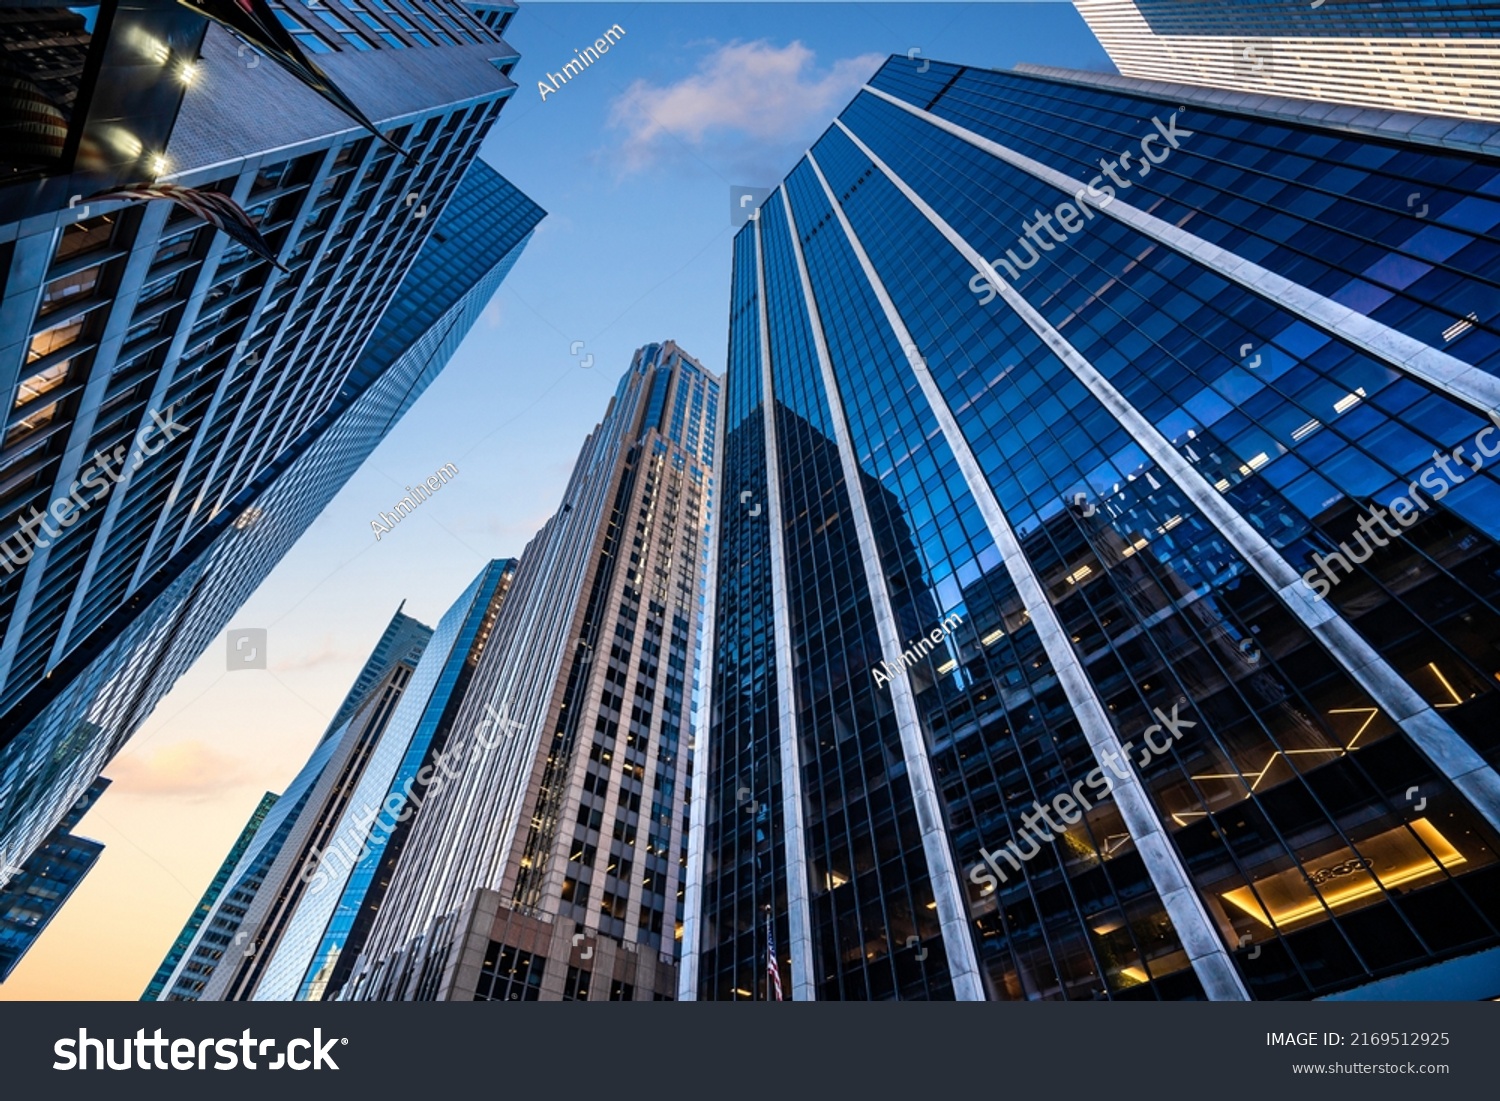 Looking directly up at the skyline of the financial district in central London stock photo #2169512925